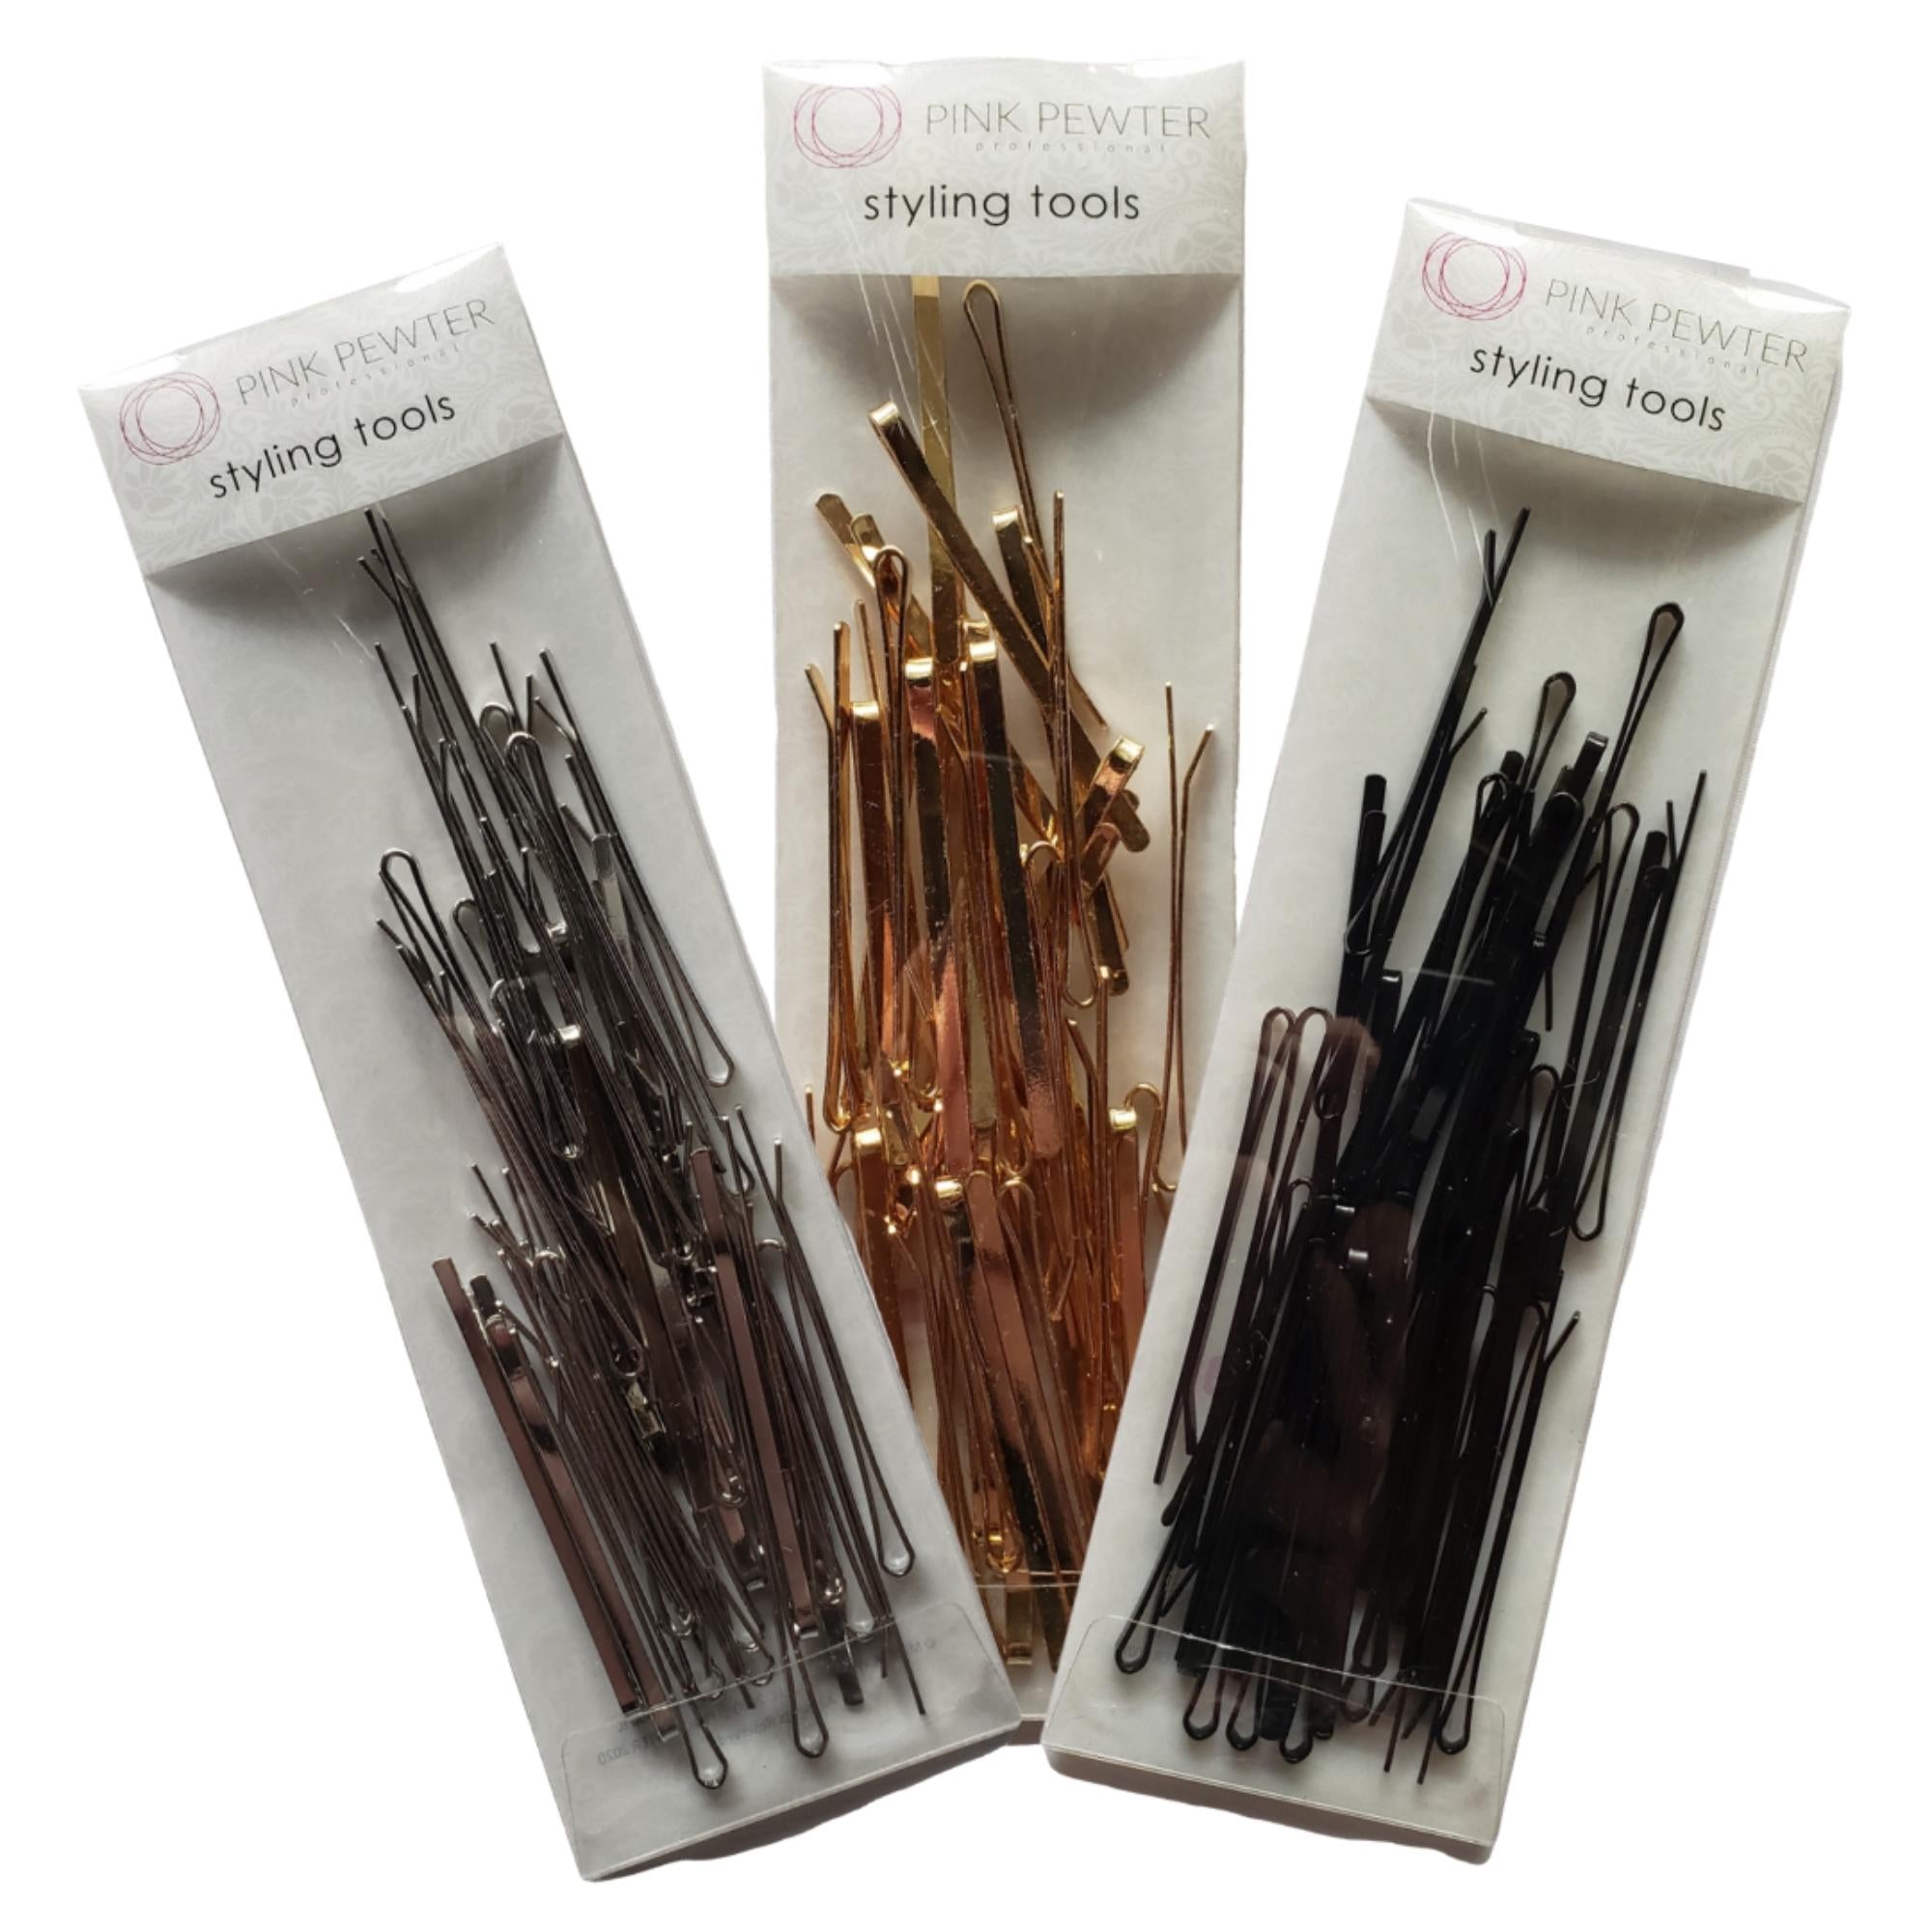 Pink Pewter Professional Flat Metal Styling Bobby Pins in Storage Cases - 120pc Pack (Black/Silver/Gold)